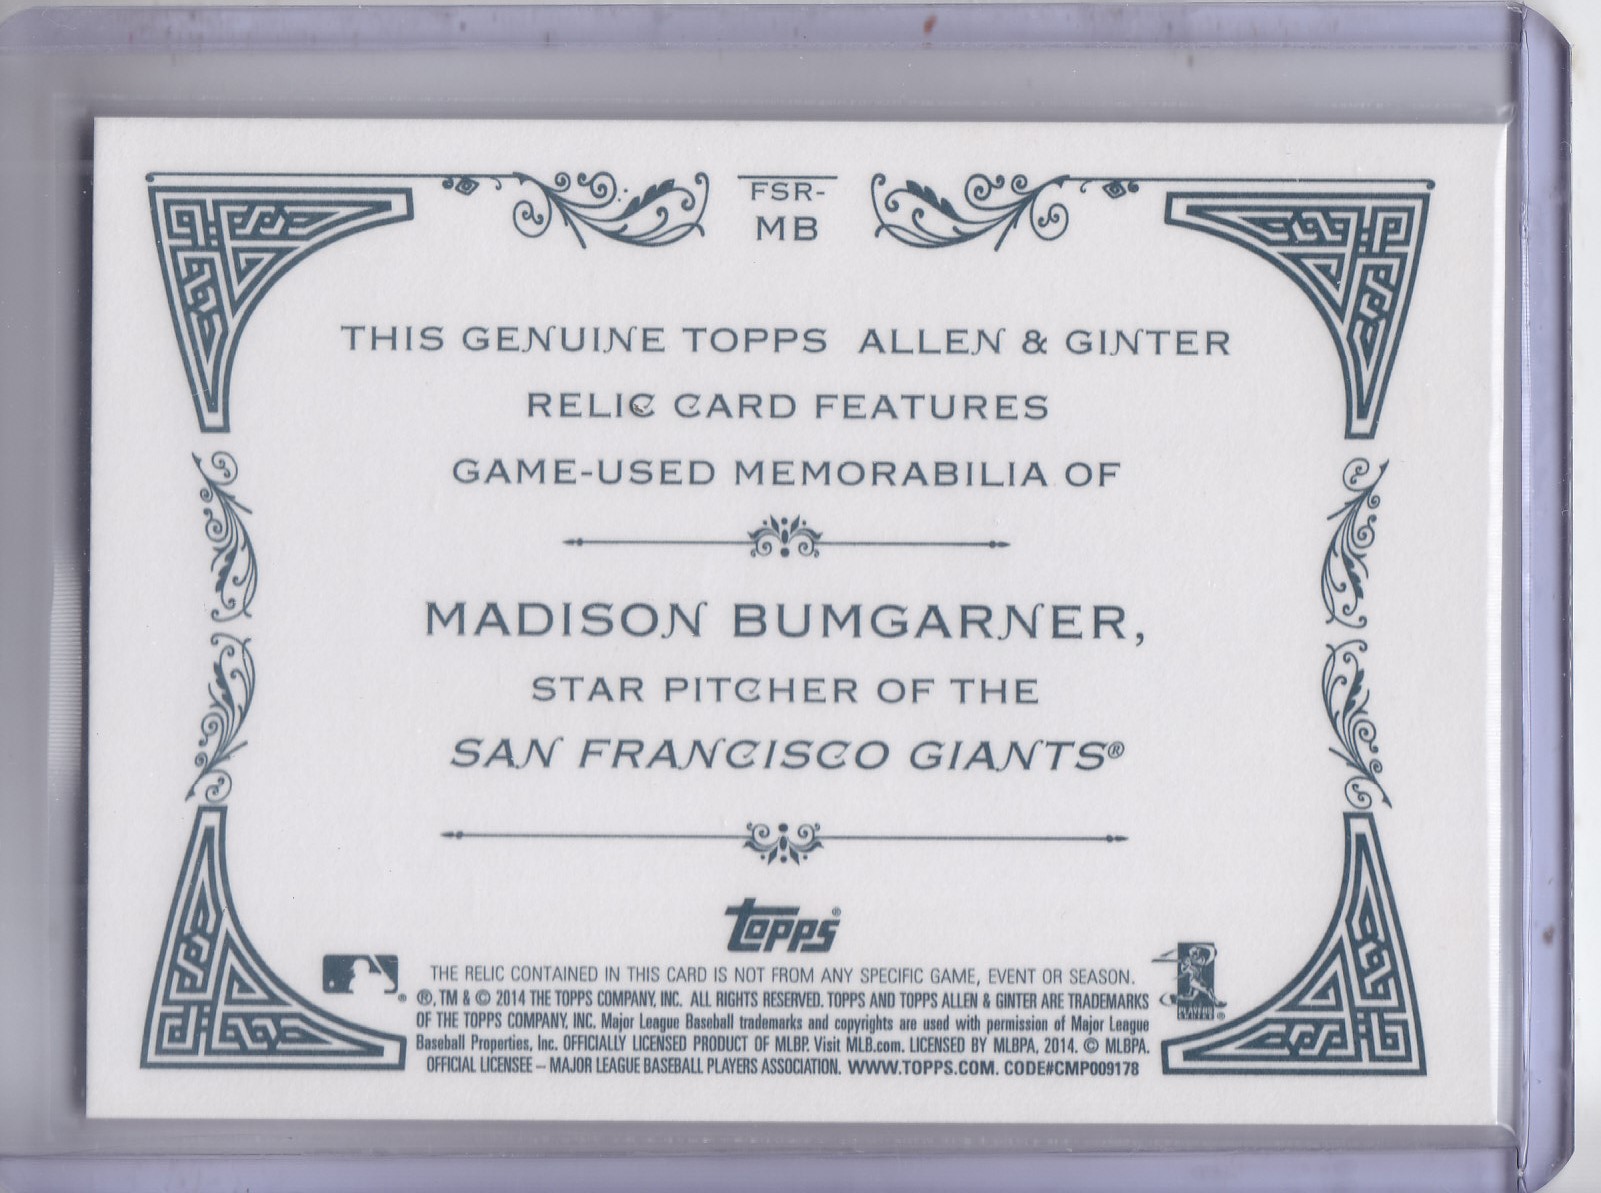 2014 Topps Allen and Ginter Relics #FSRMB Madison Bumgarner A back image